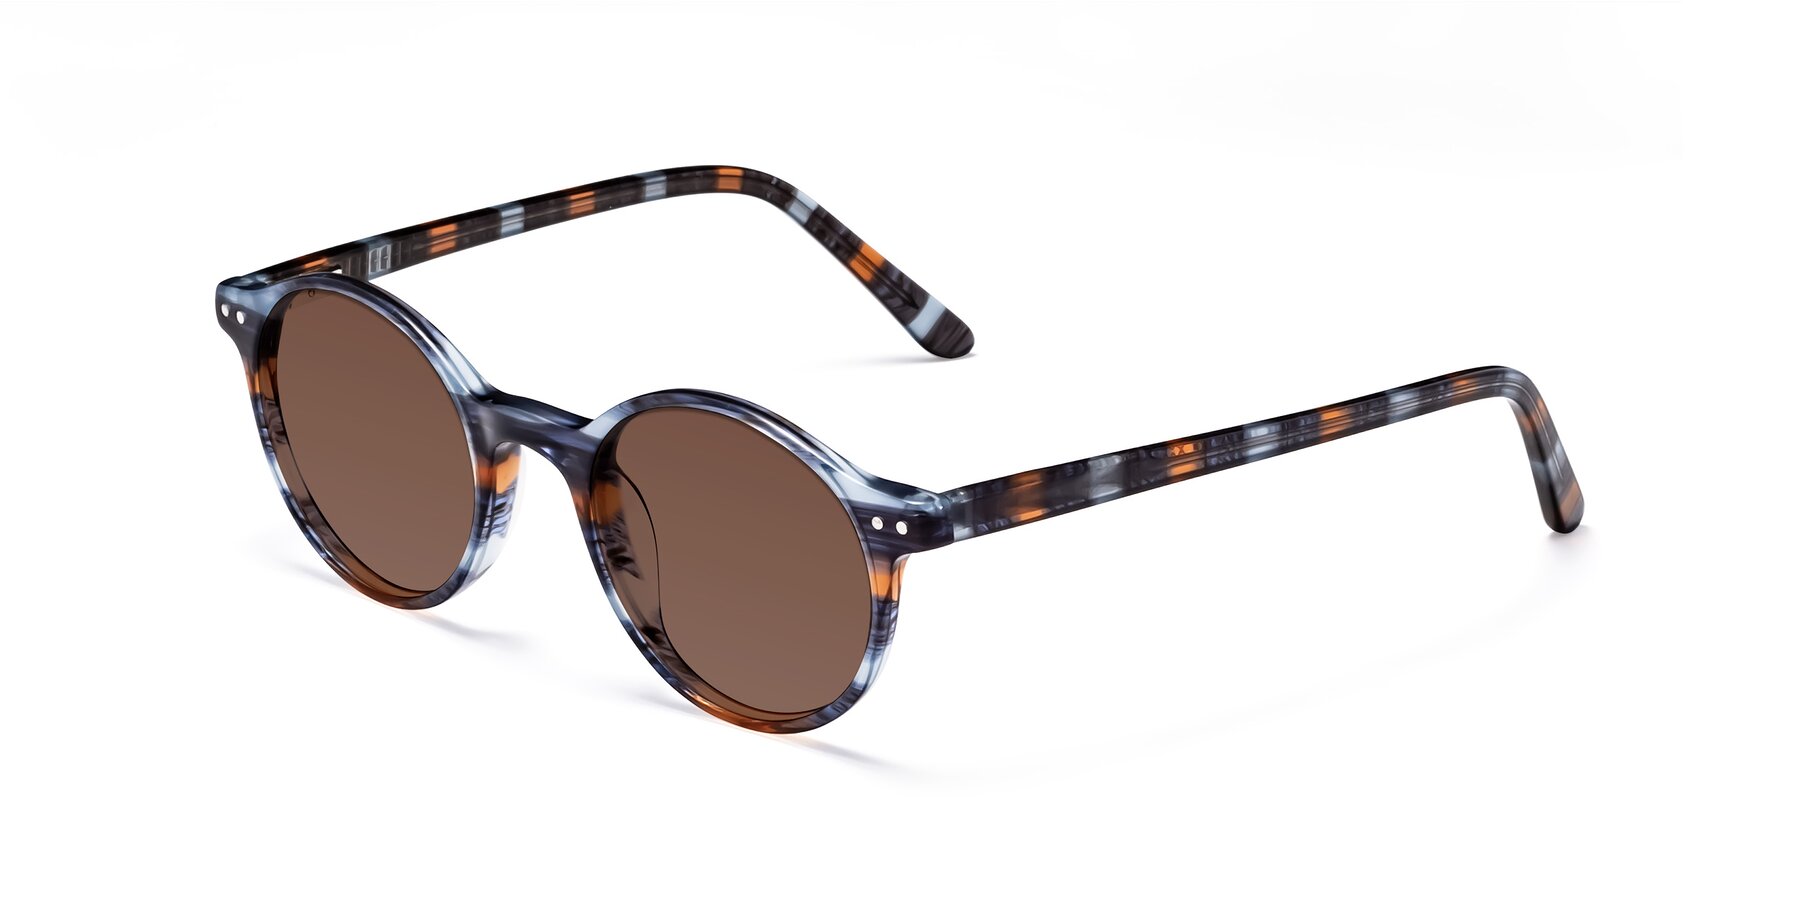 Angle of Jardi in Stripe Blue Brown with Brown Tinted Lenses